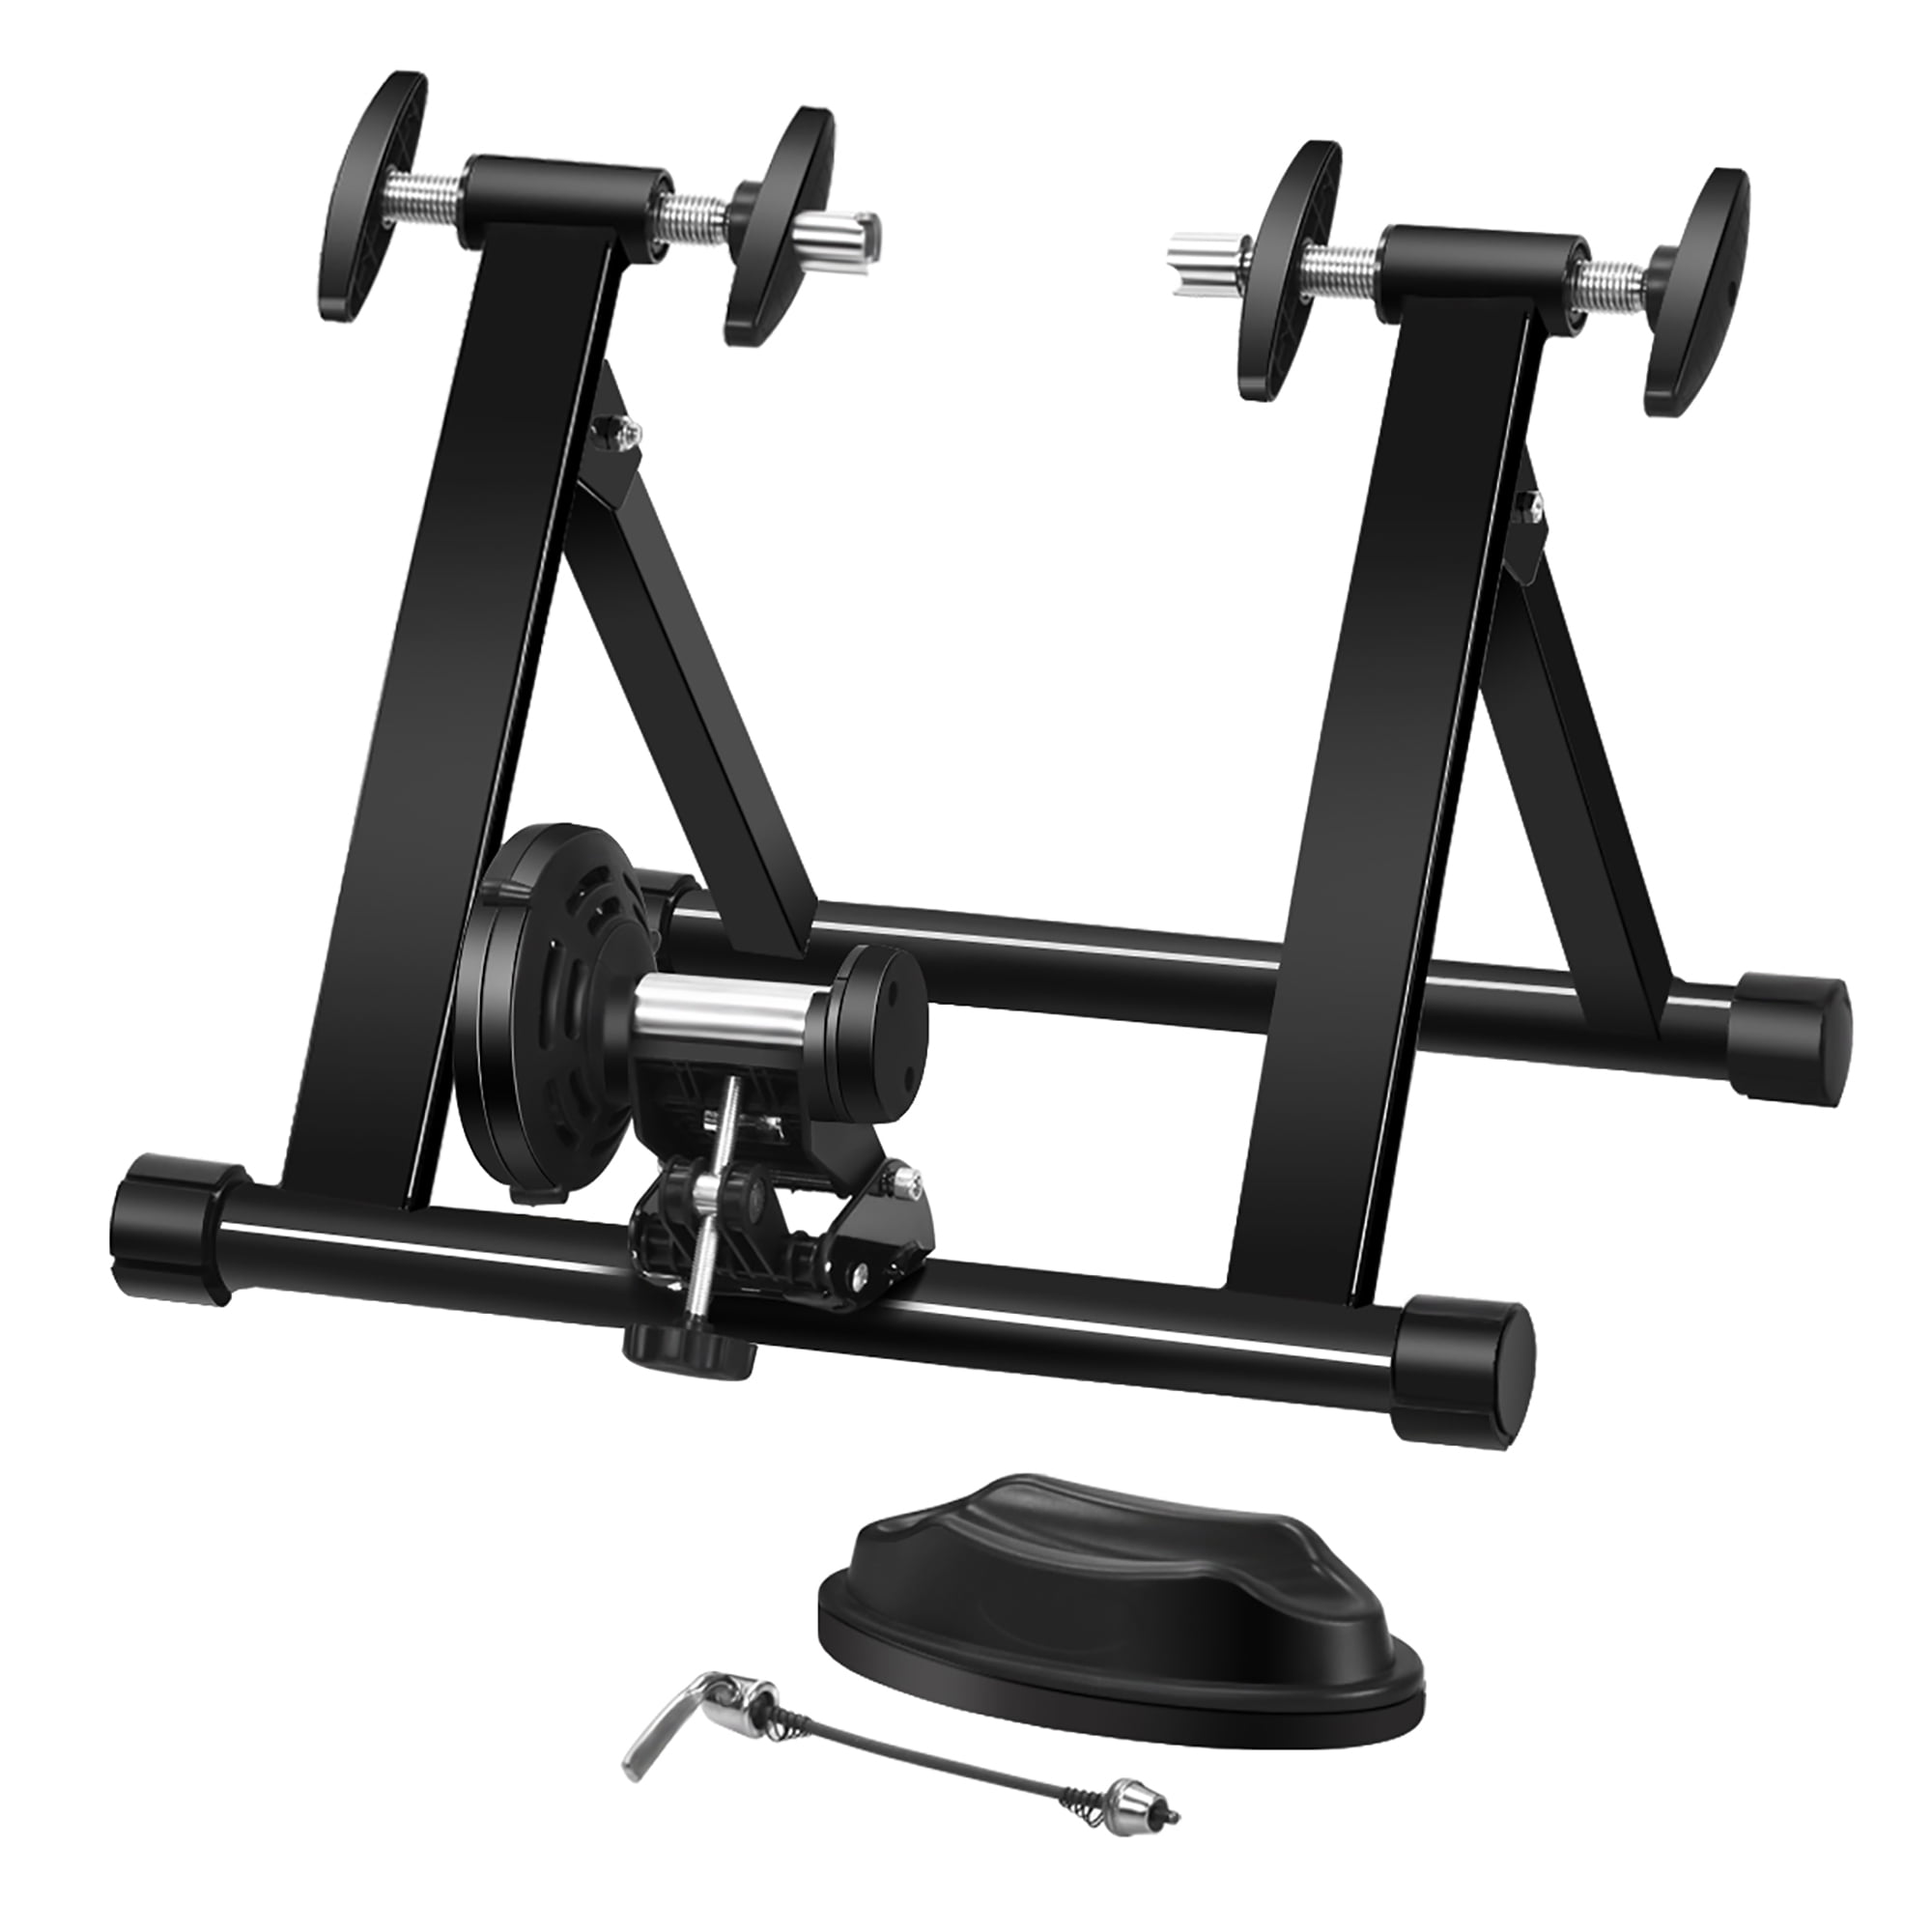 Details about   Magnetic Indoor Bike Exercise Station Stand Bicycle Trainer 7 Level Resistance 